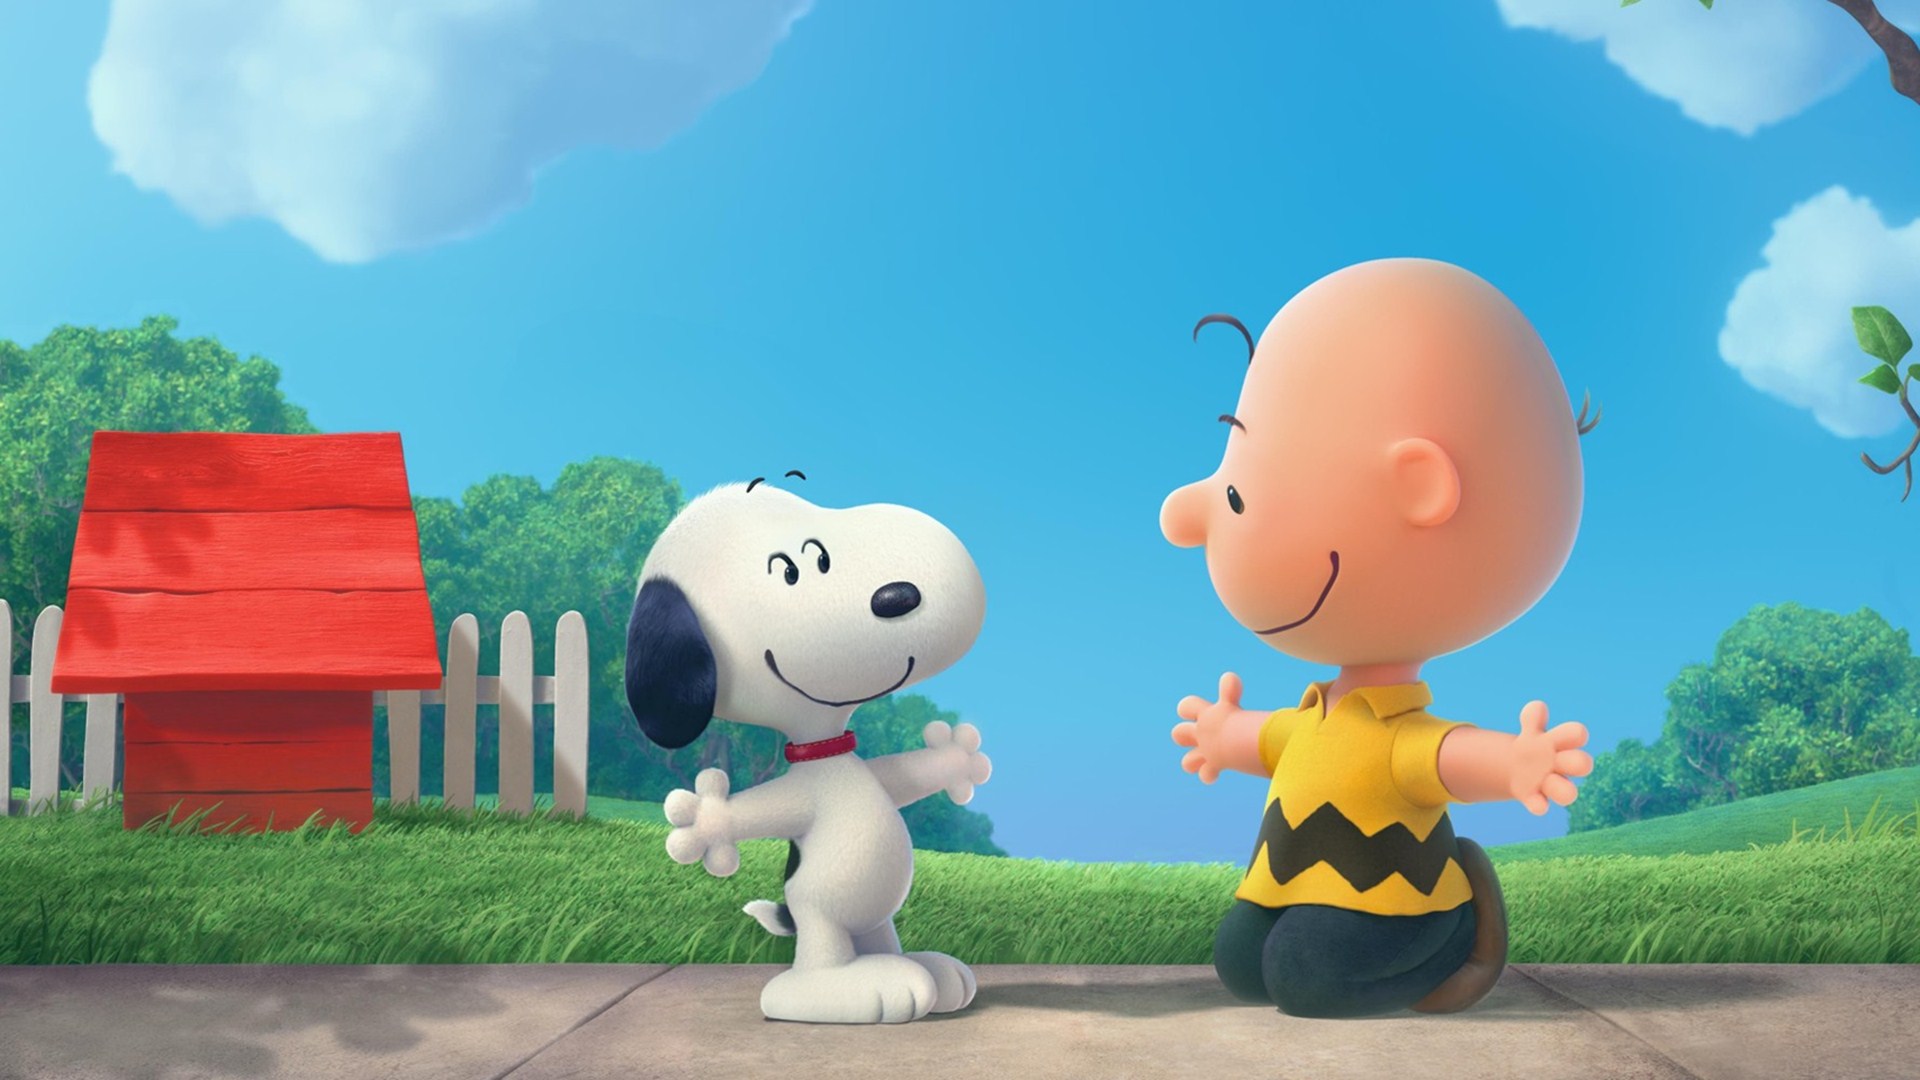 Download Snoopy And Charlie Brown The Peanuts Cartoon HD Wallpaper 1920x1080